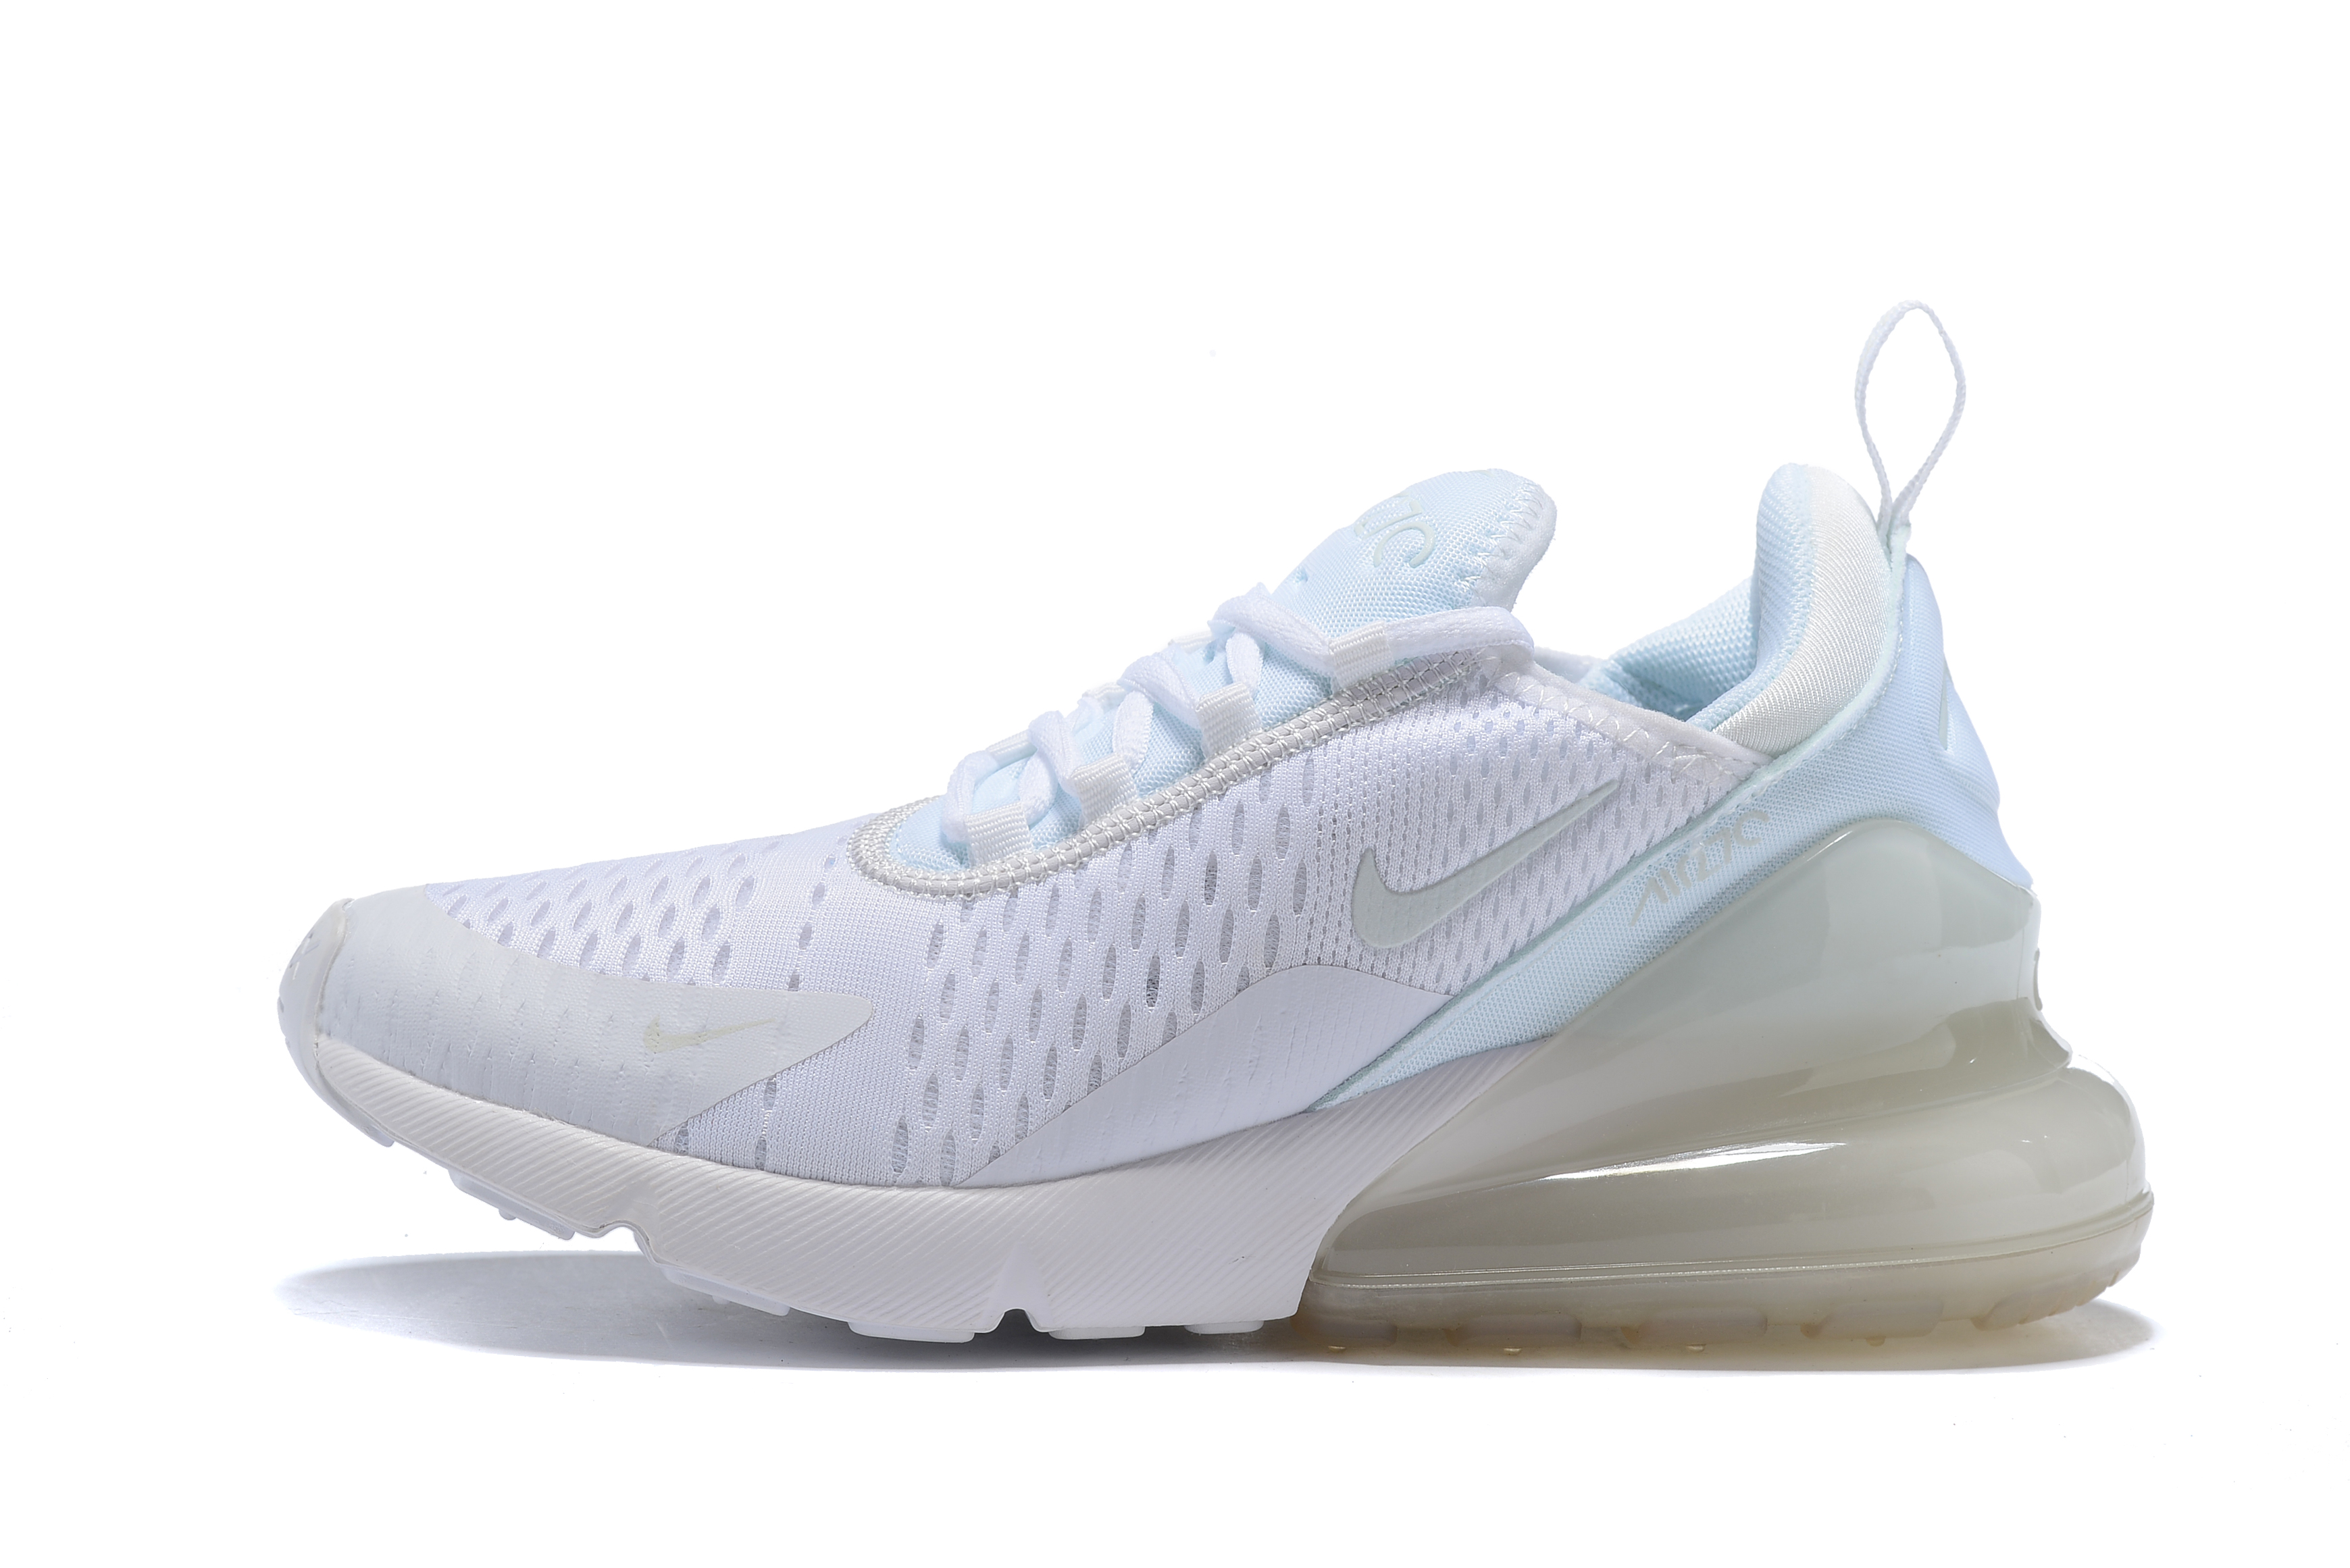 Nike Air Max 270 Midnight All White Shoes